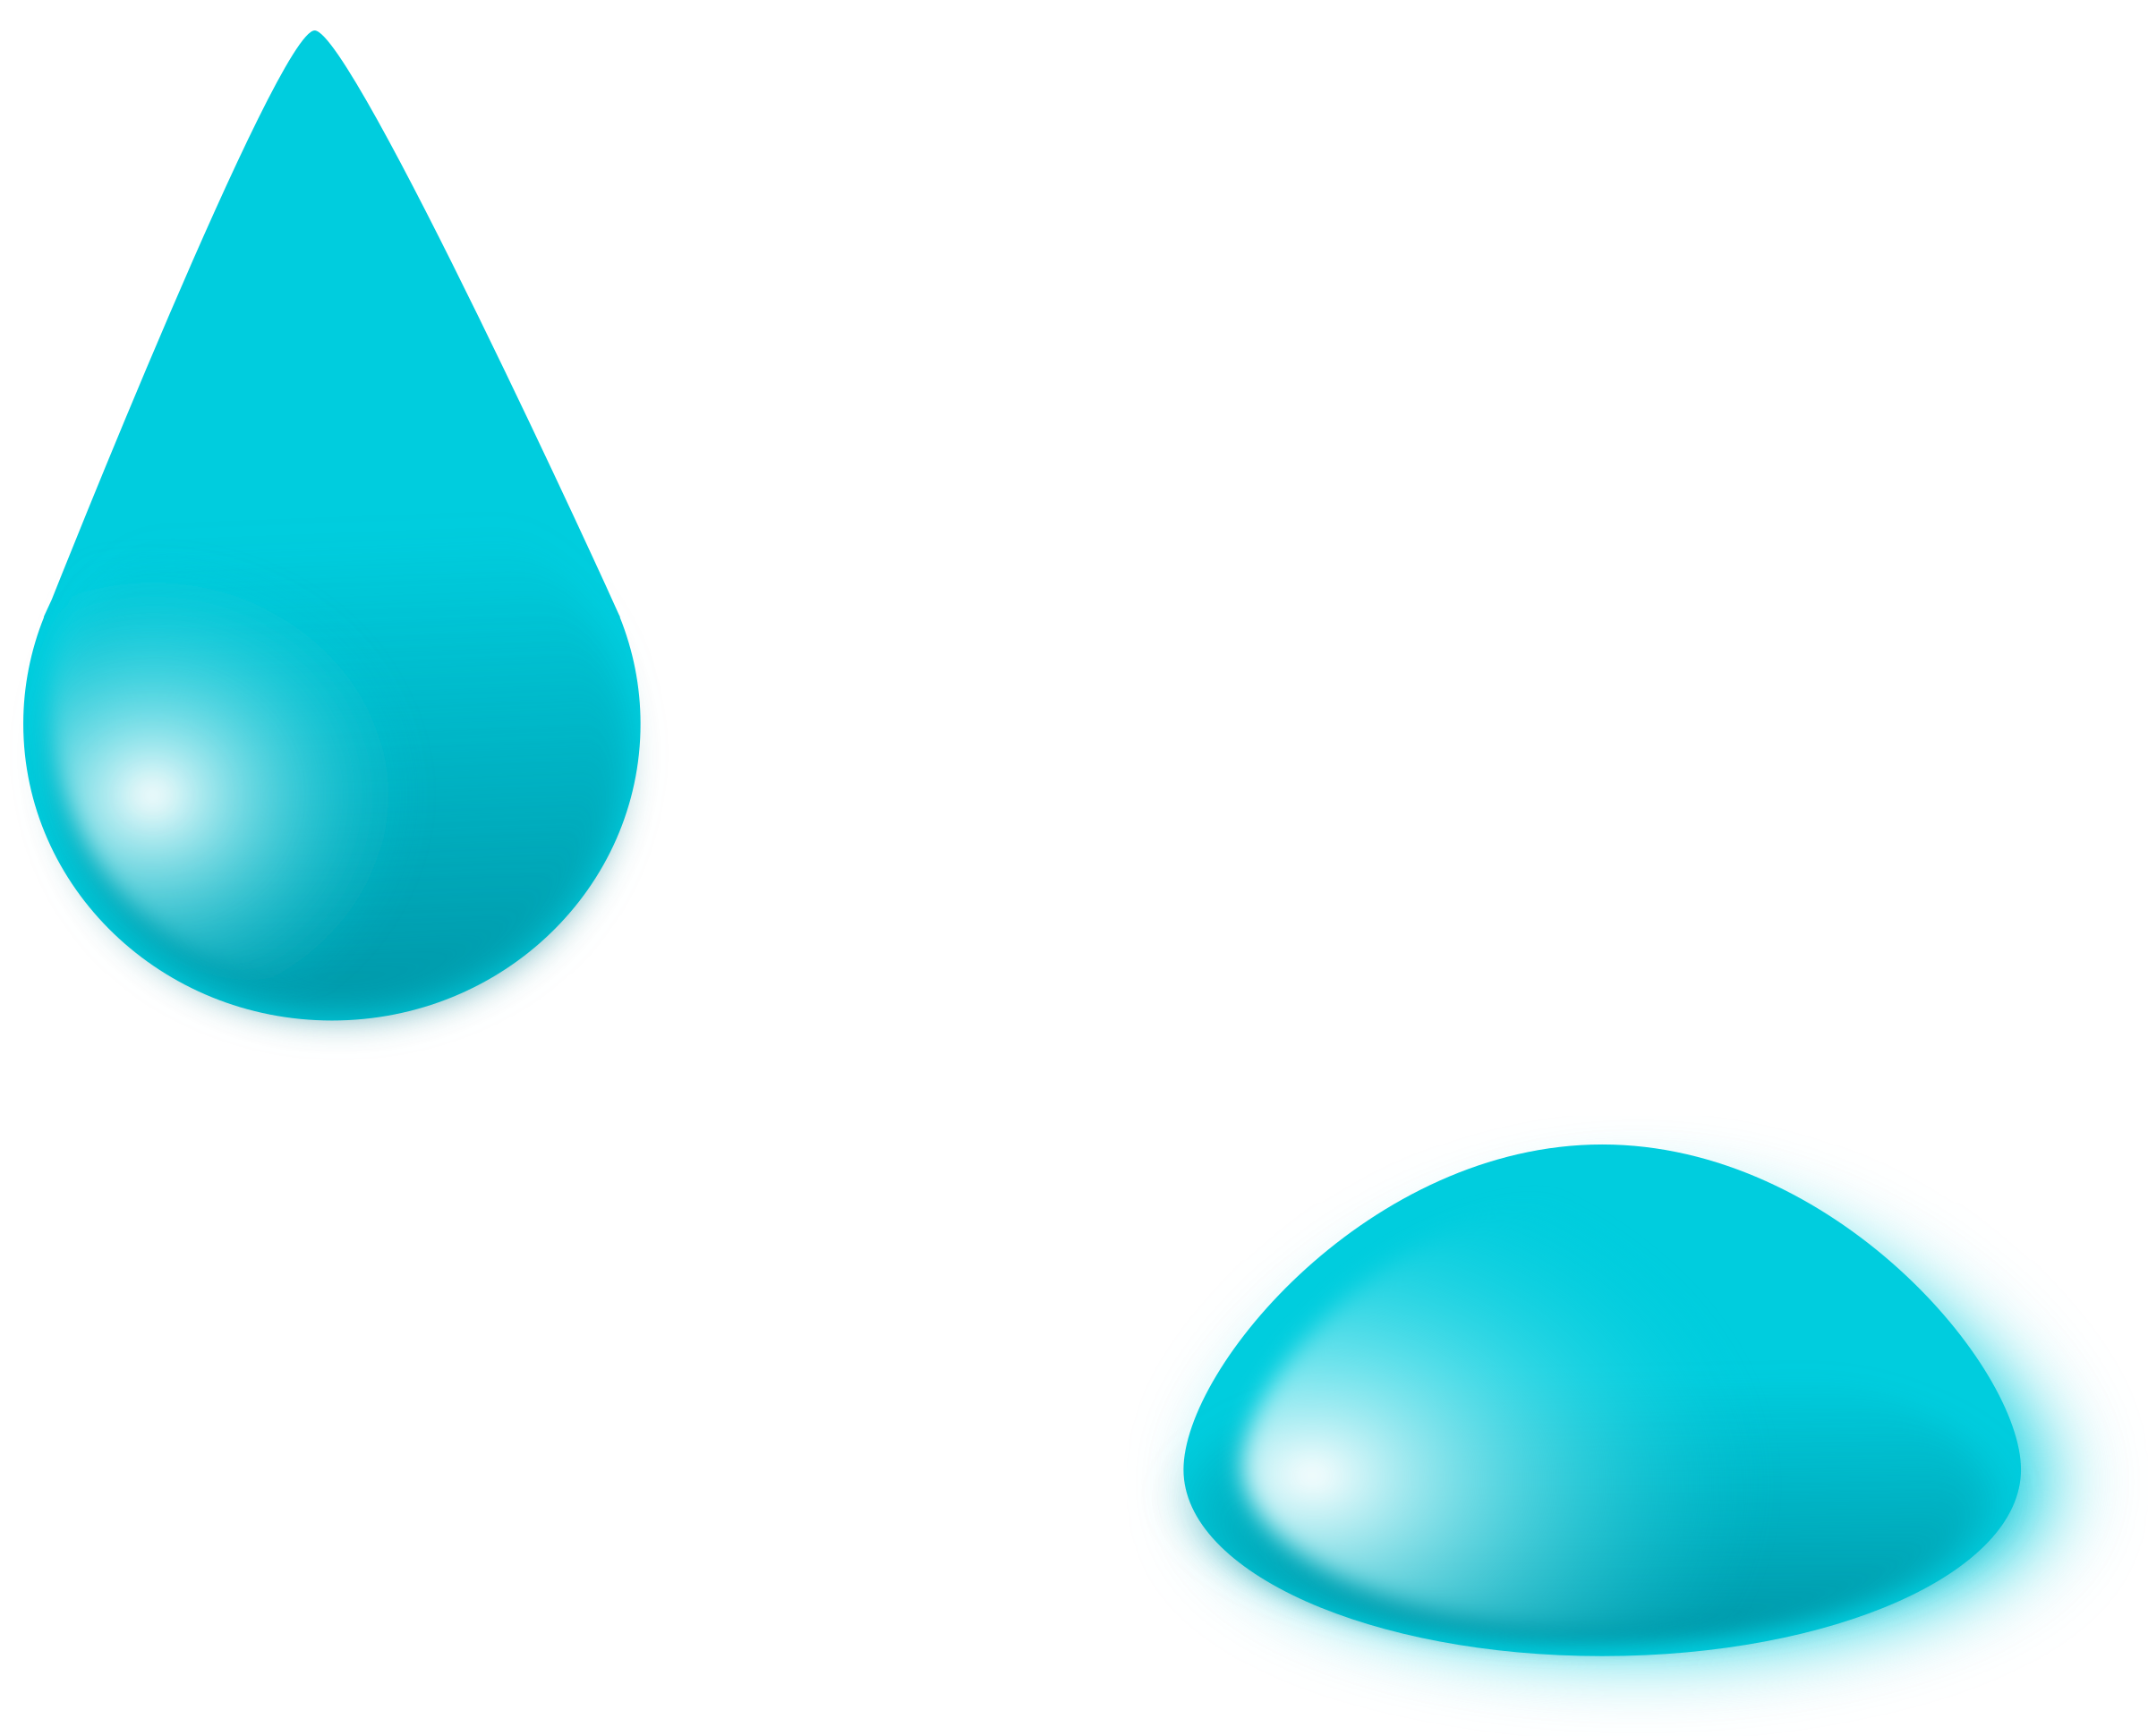 Water Drop Clipart | Free download best Water Drop Clipart on ...